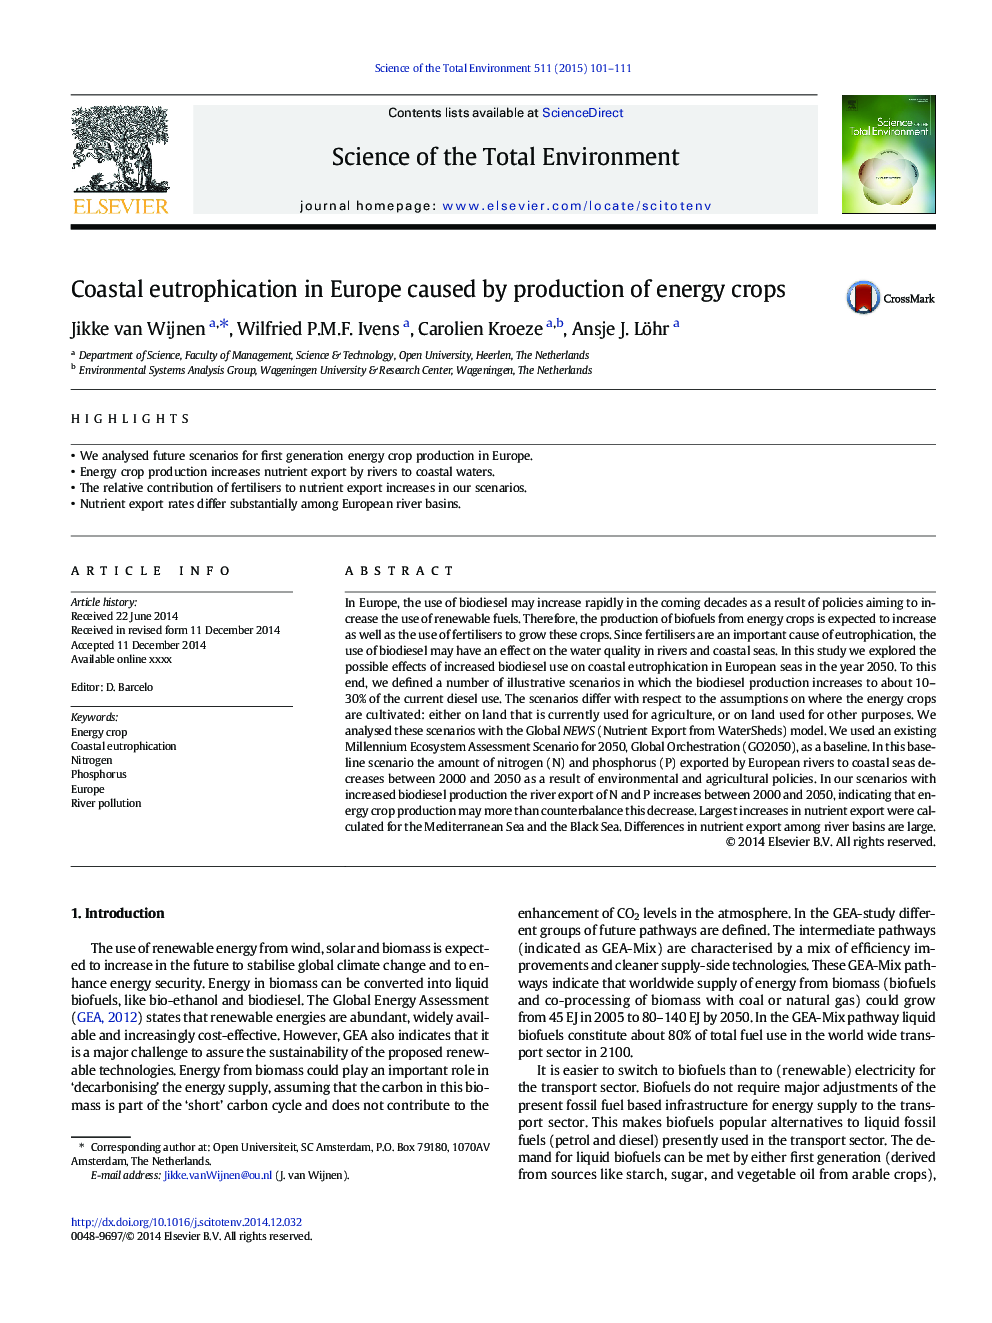 Coastal eutrophication in Europe caused by production of energy crops